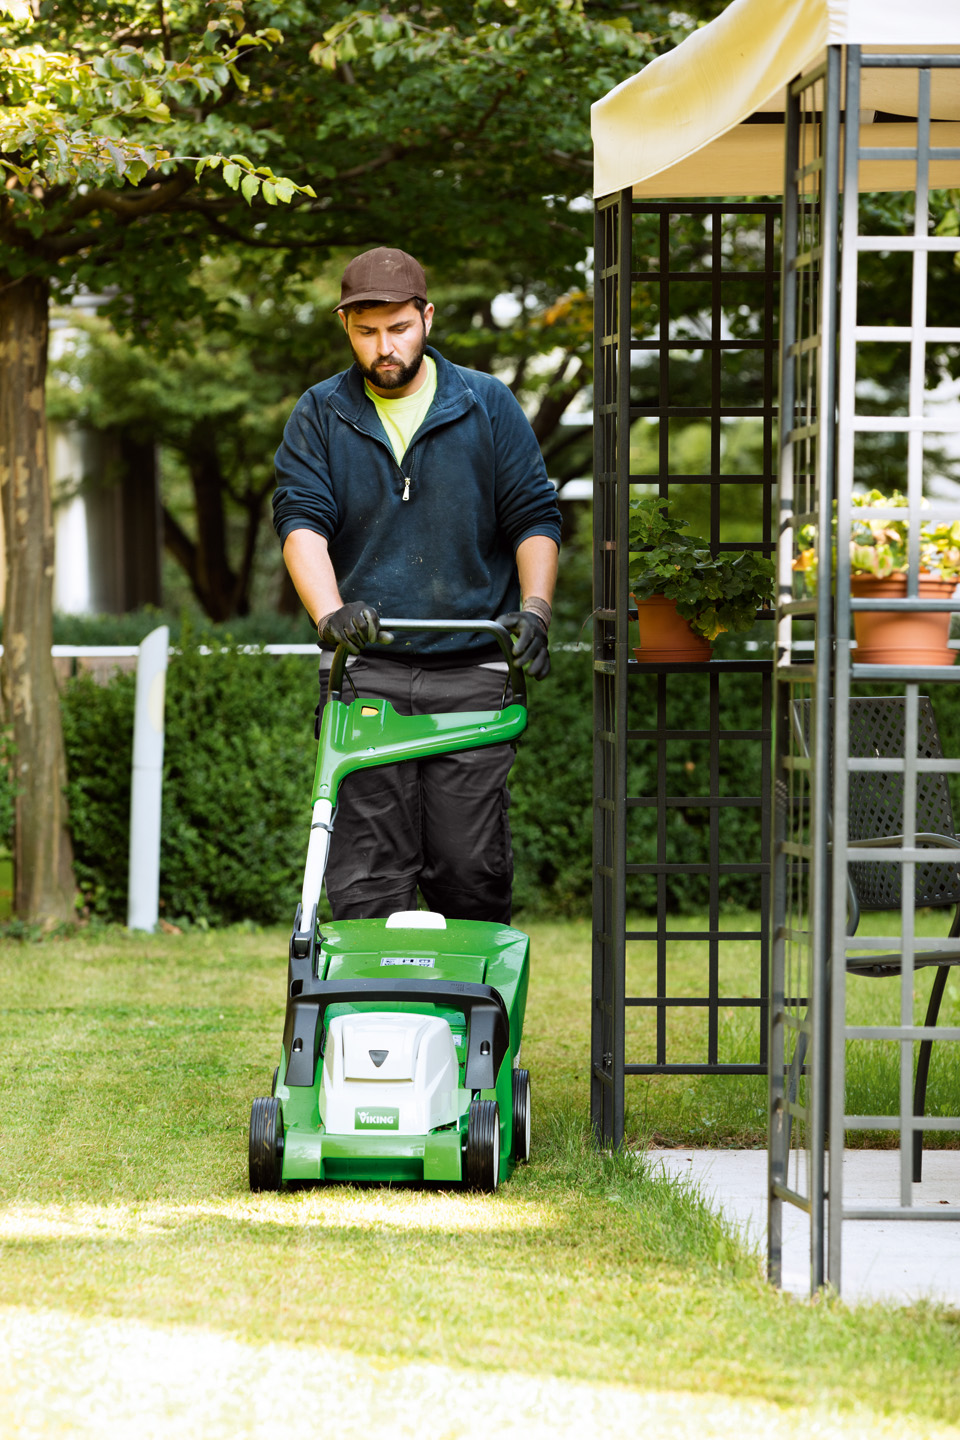 MA 443 cordless lawn mowers from VIKING